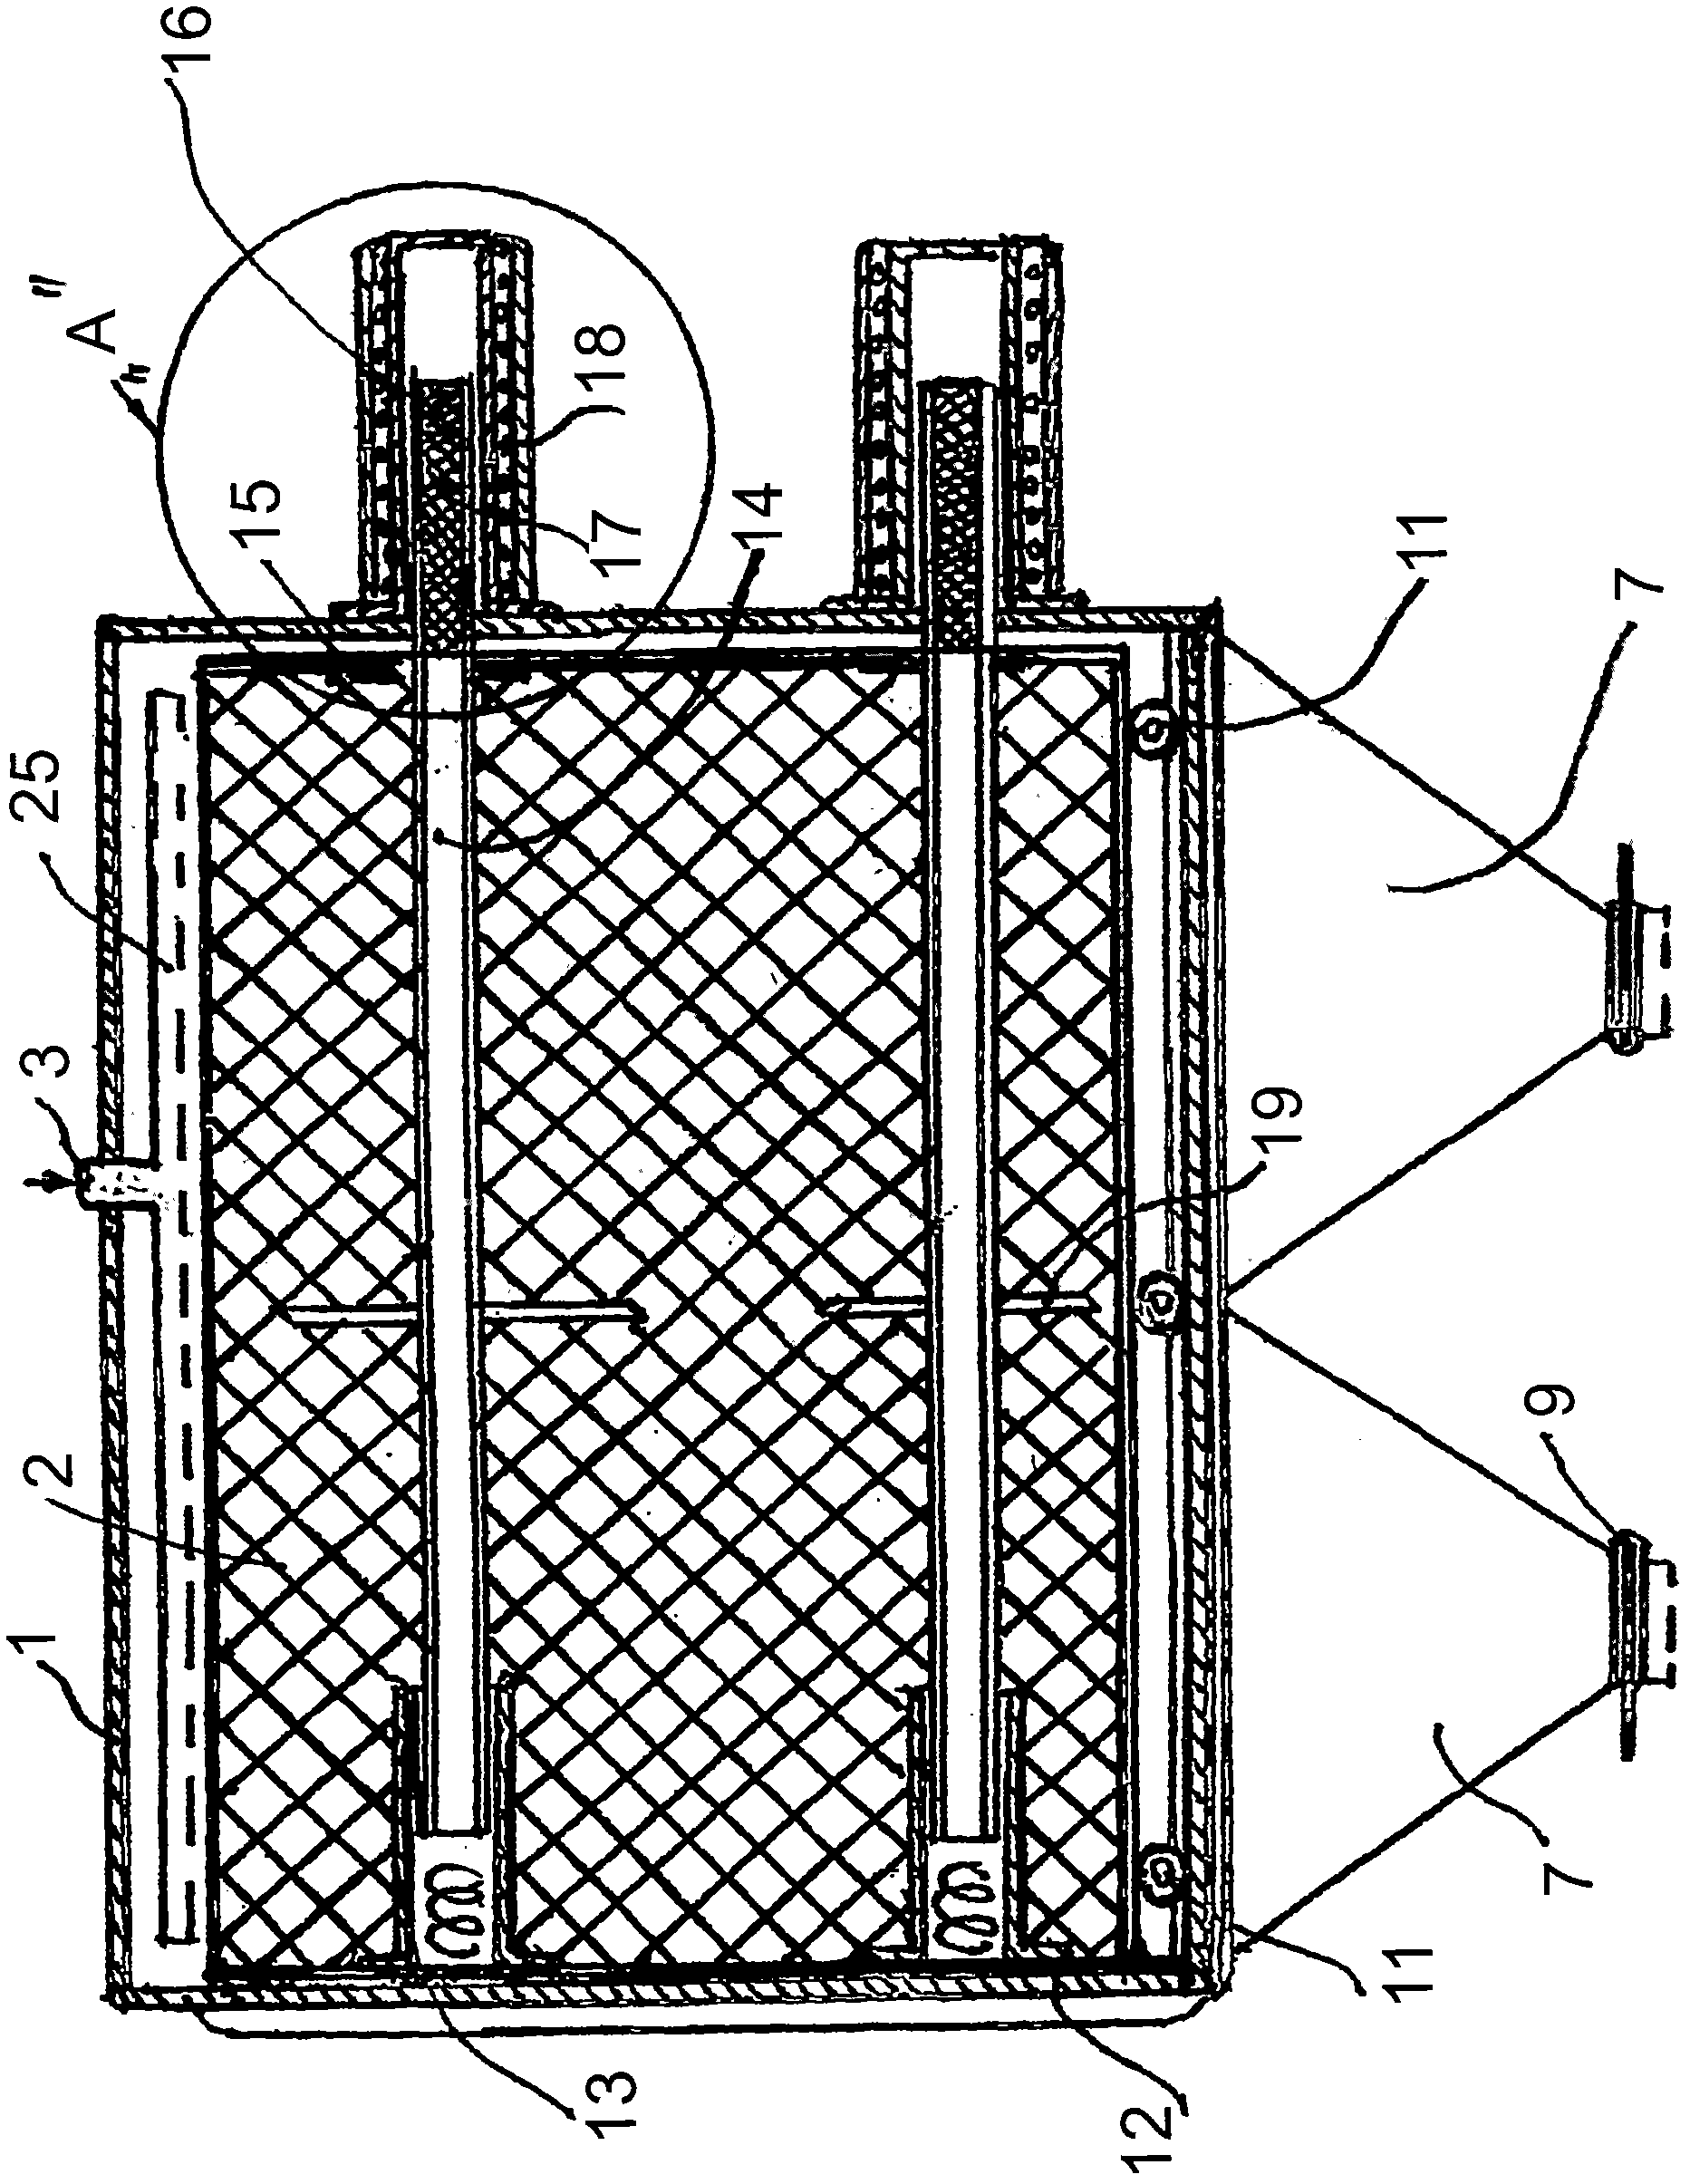 Method, process and device for polymeric waste processing